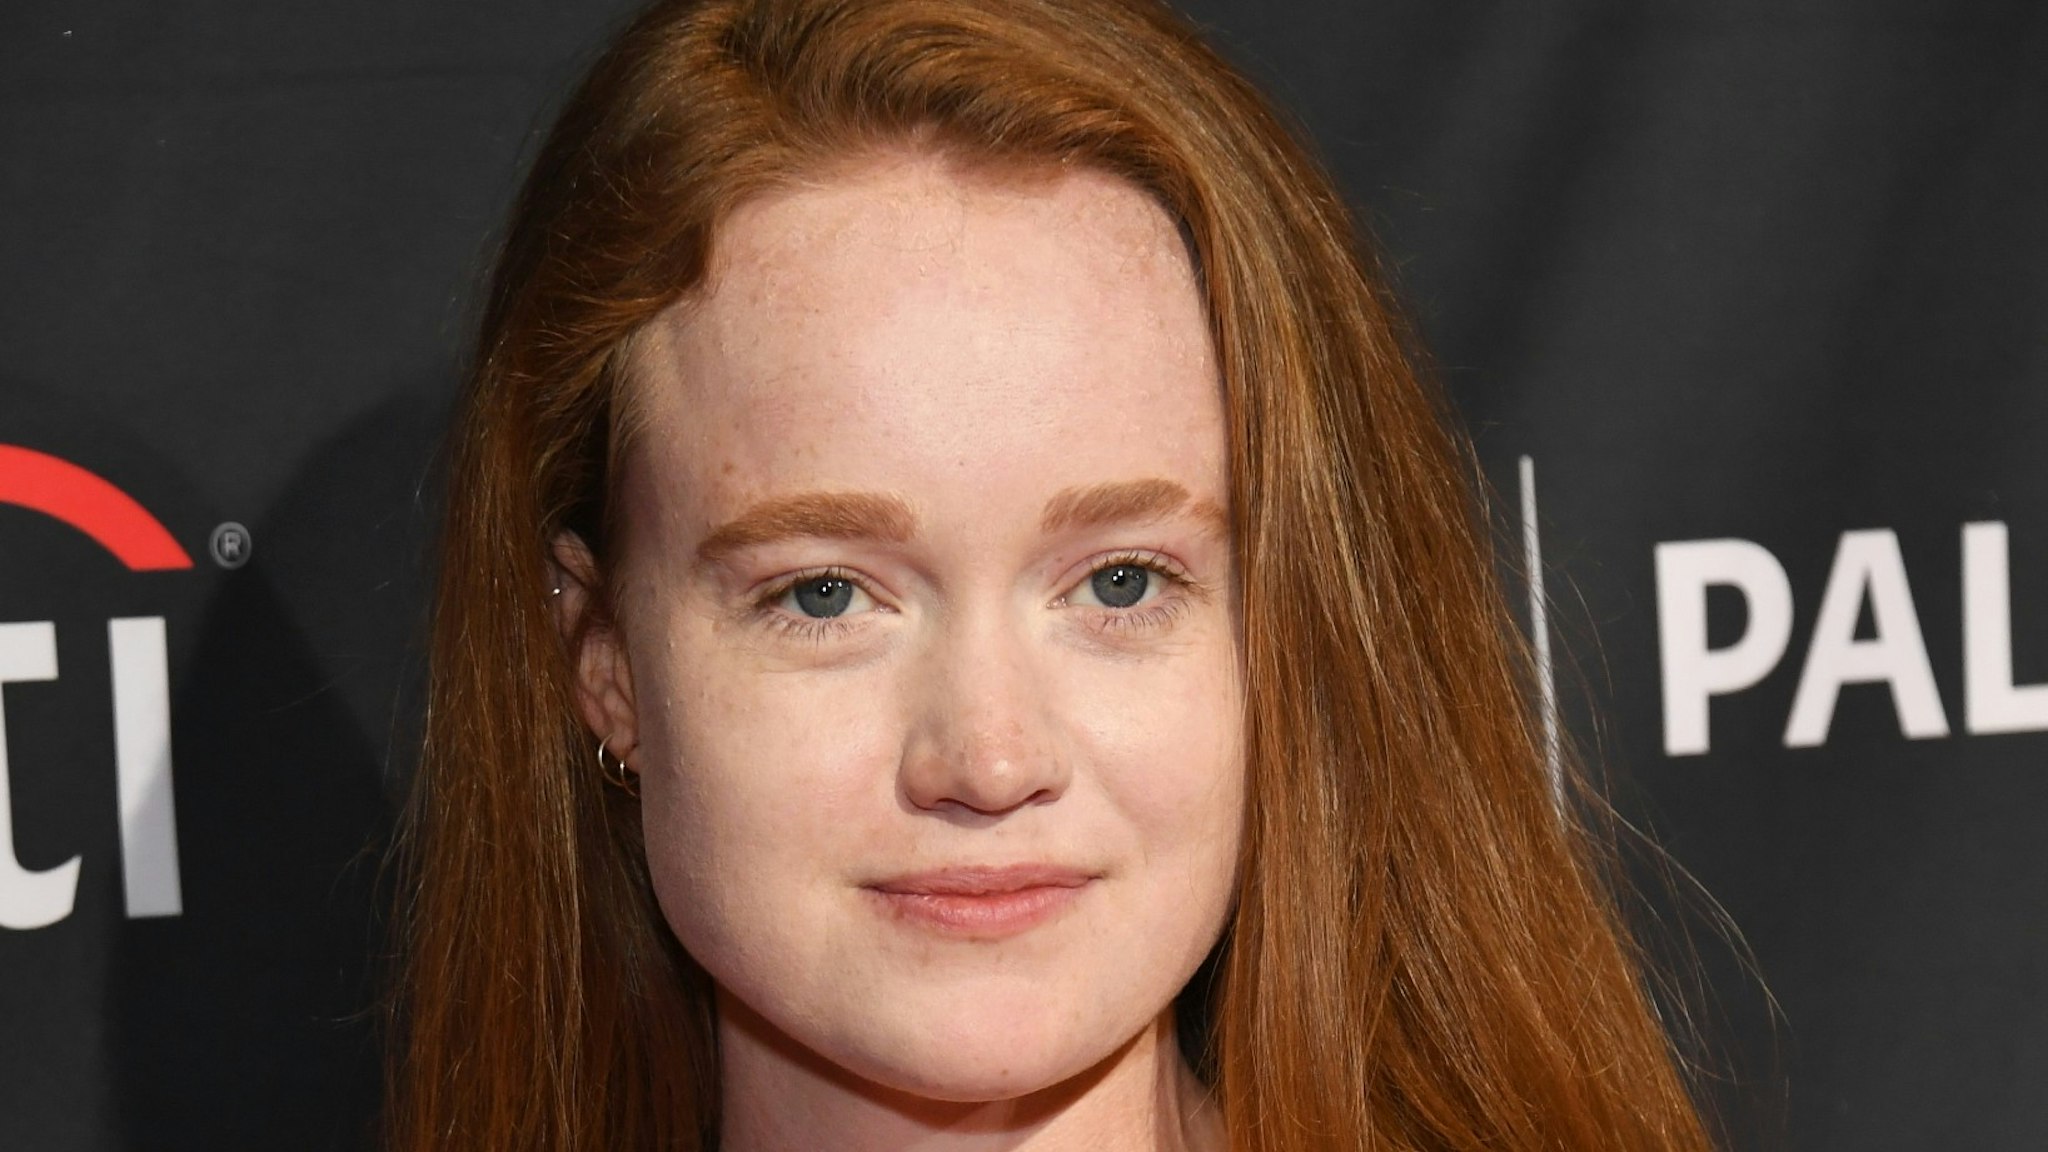 Liv Hewson attends PaleyFest LA 2023 - "Yellowjackets" at Dolby Theatre on April 03, 2023 in Hollywood, California.